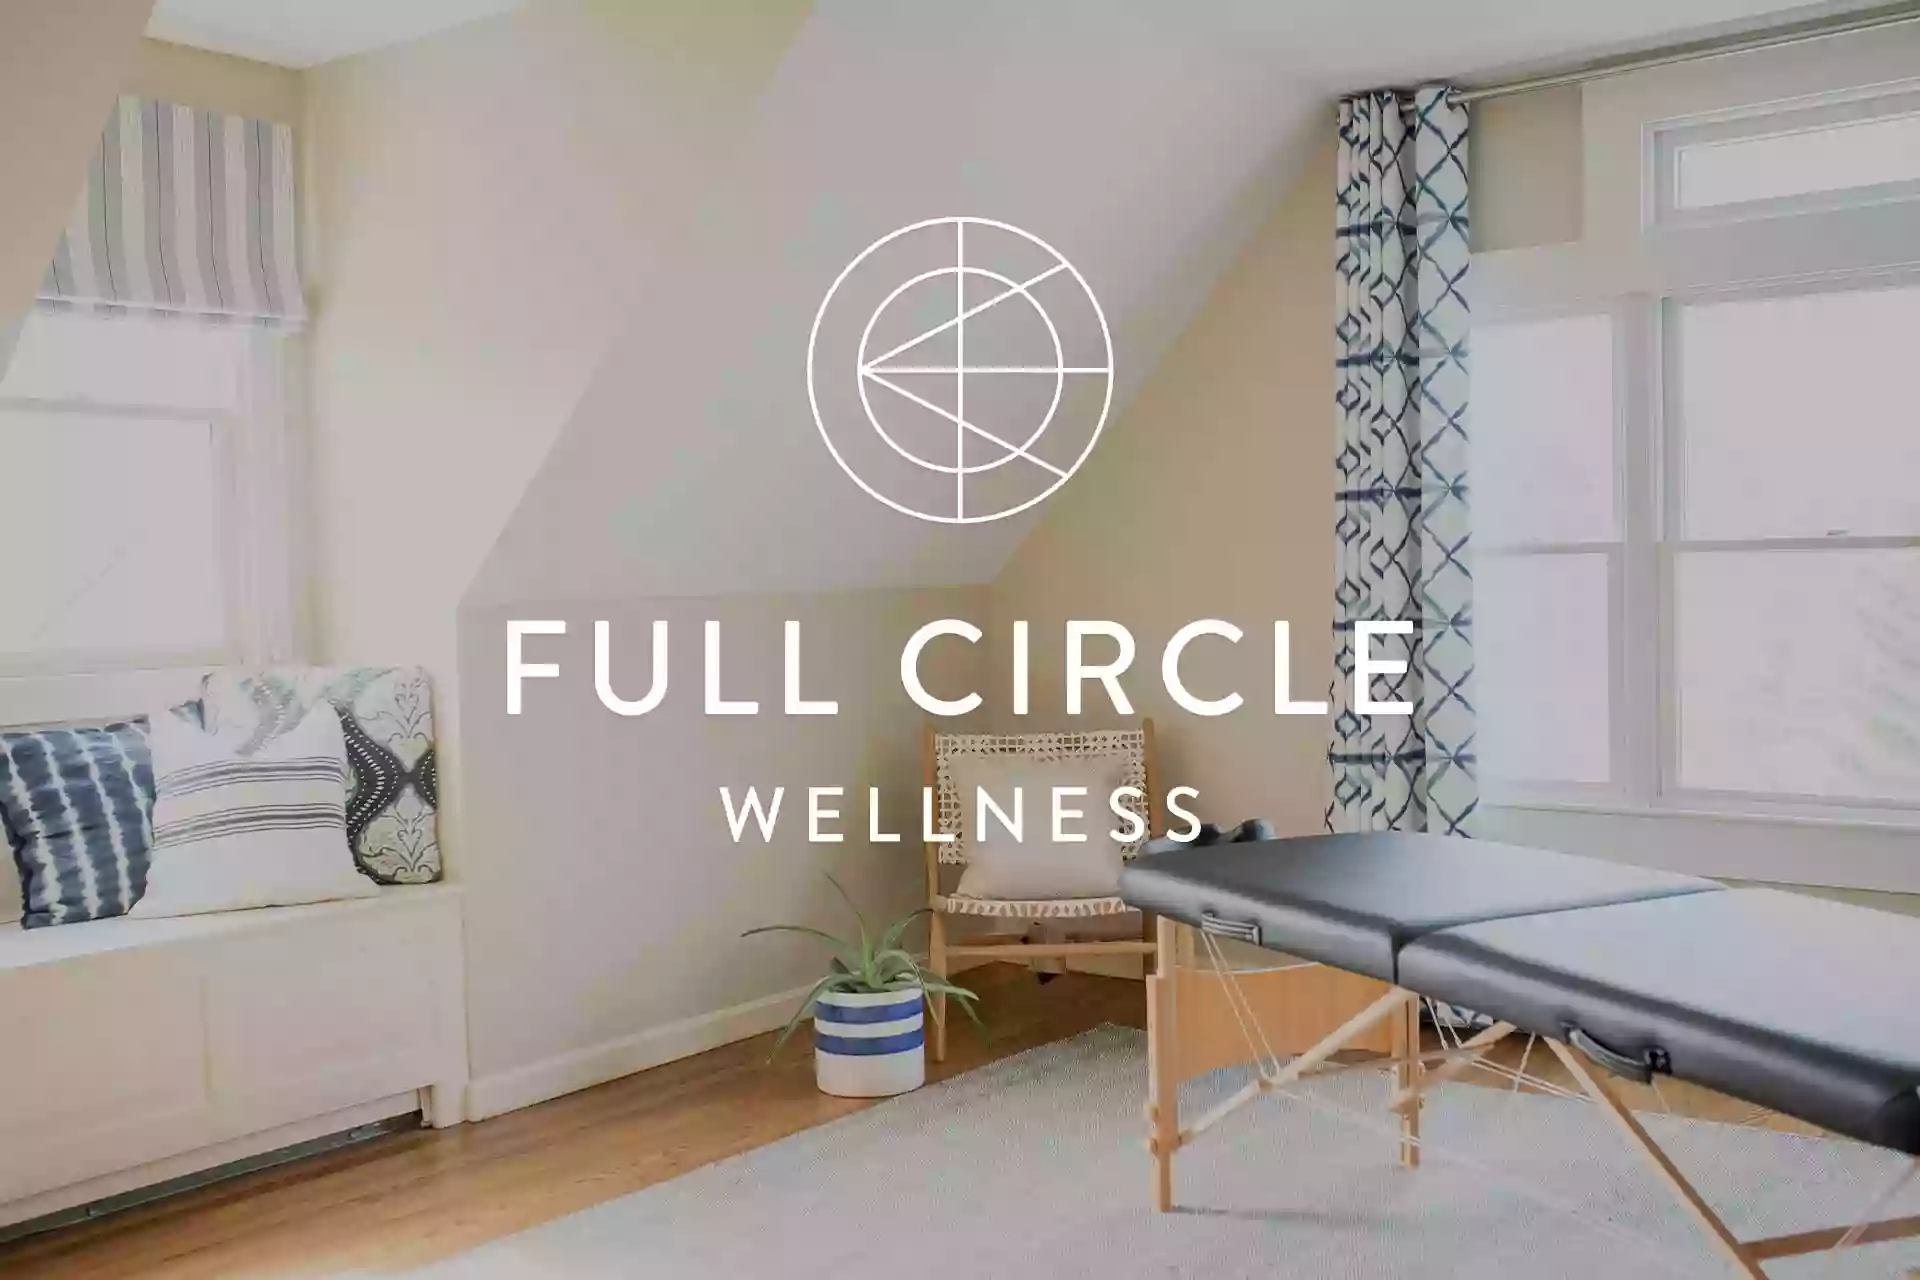 Full Circle Physical therapy and wellness coaching